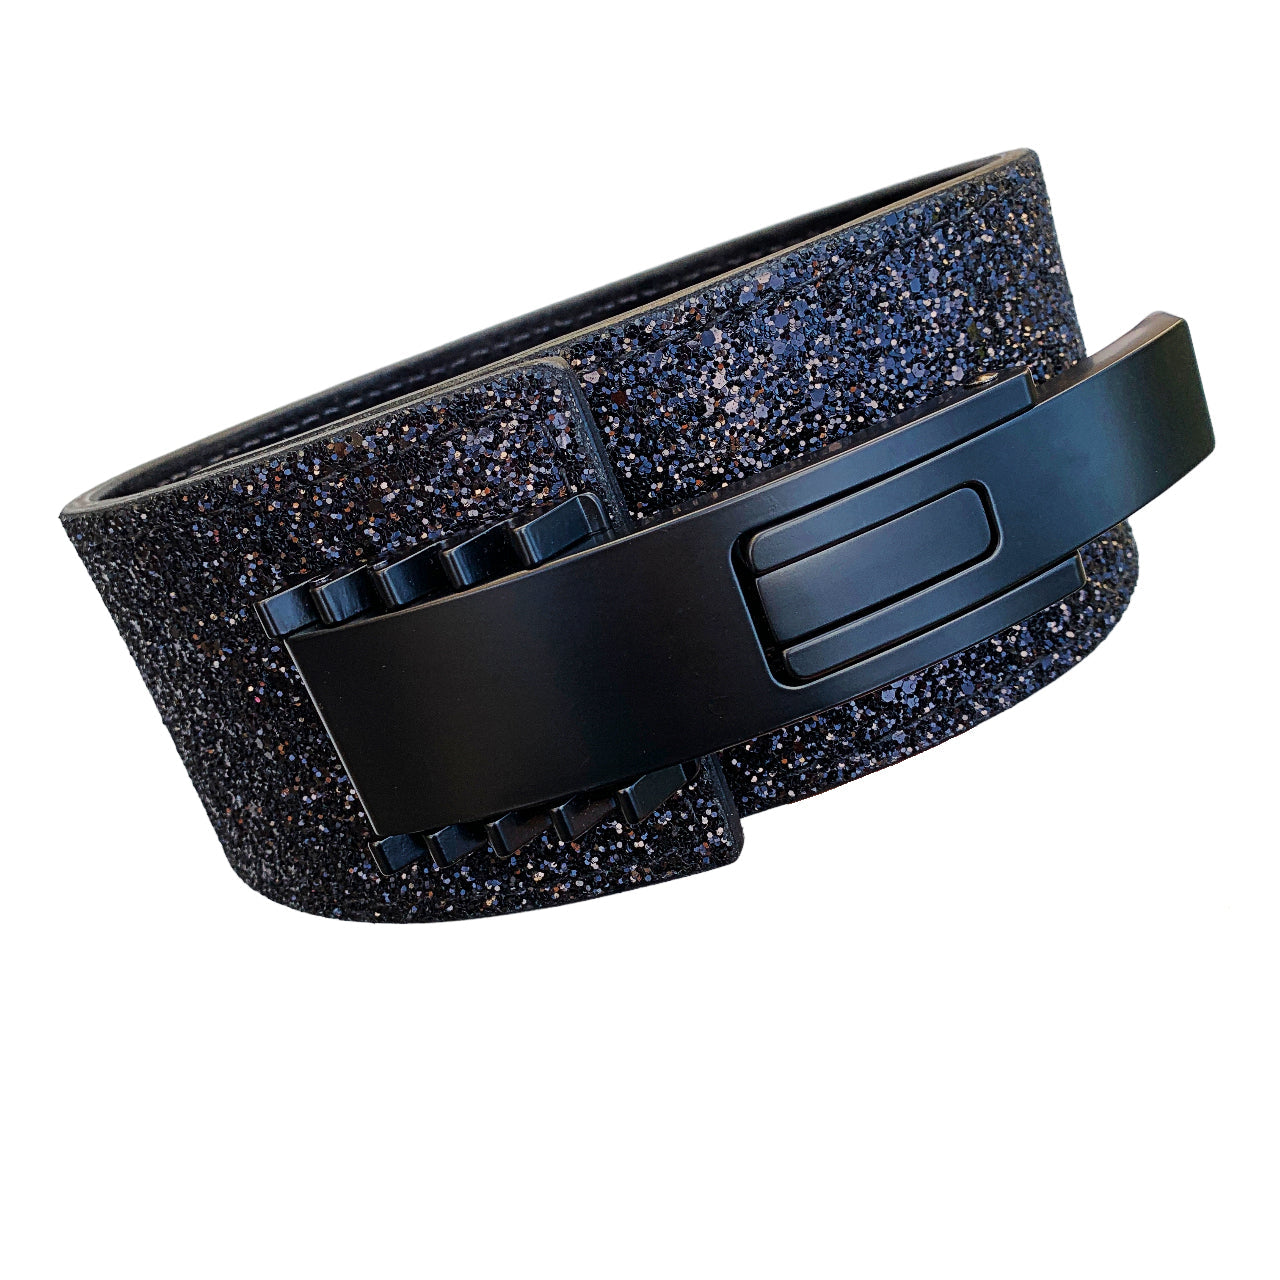 Pioneer Fitness Powerlifting Lever Belt – 10mm thick – 3" wide (Sparkle) - PAL V2